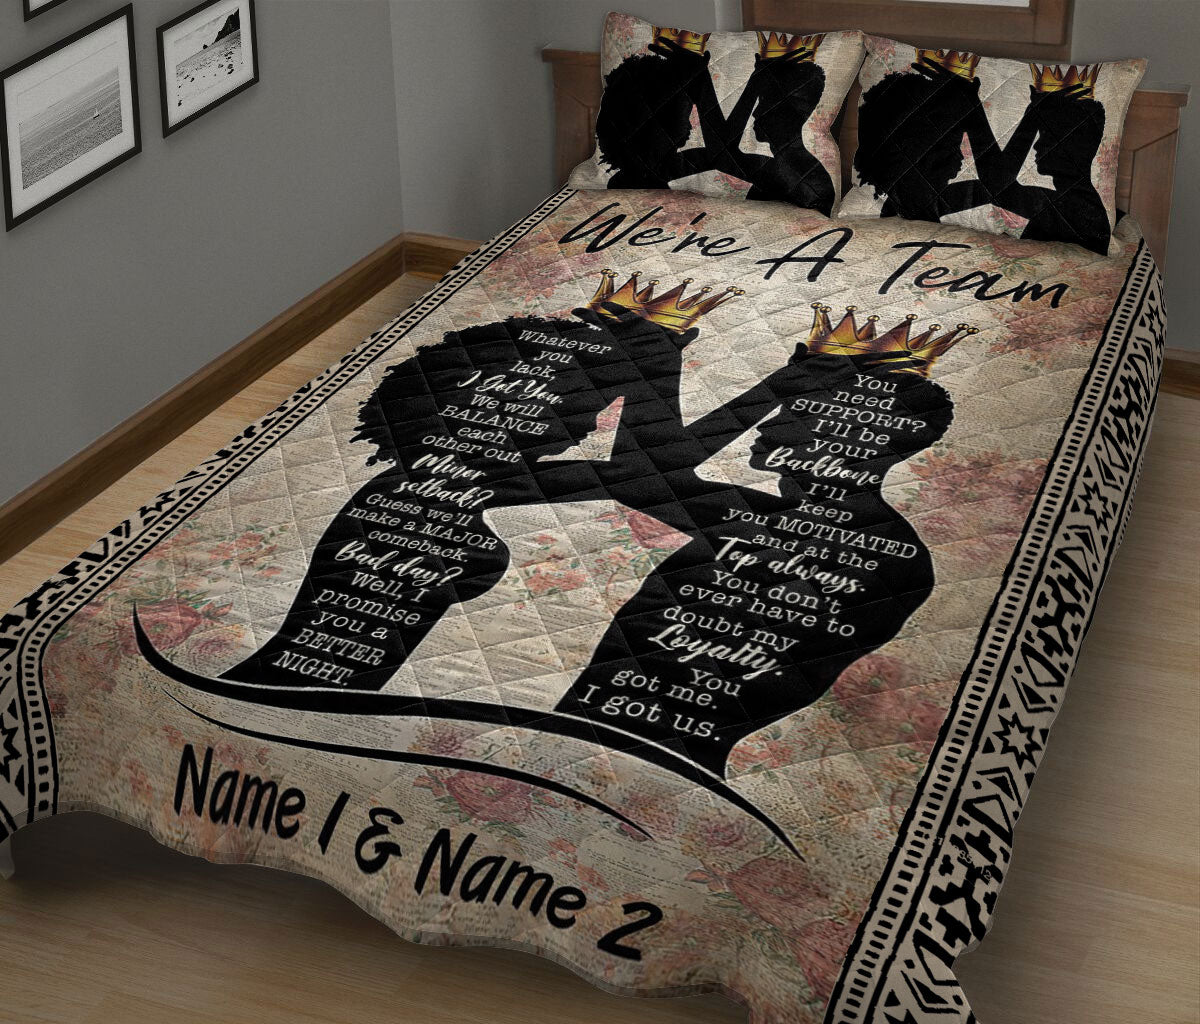 Ohaprints-Quilt-Bed-Set-Pillowcase-African-Afro-American-Black-Couple-Team-King-&-Queen-Custom-Personalized-Name-Blanket-Bedspread-Bedding-2253-King (90'' x 100'')